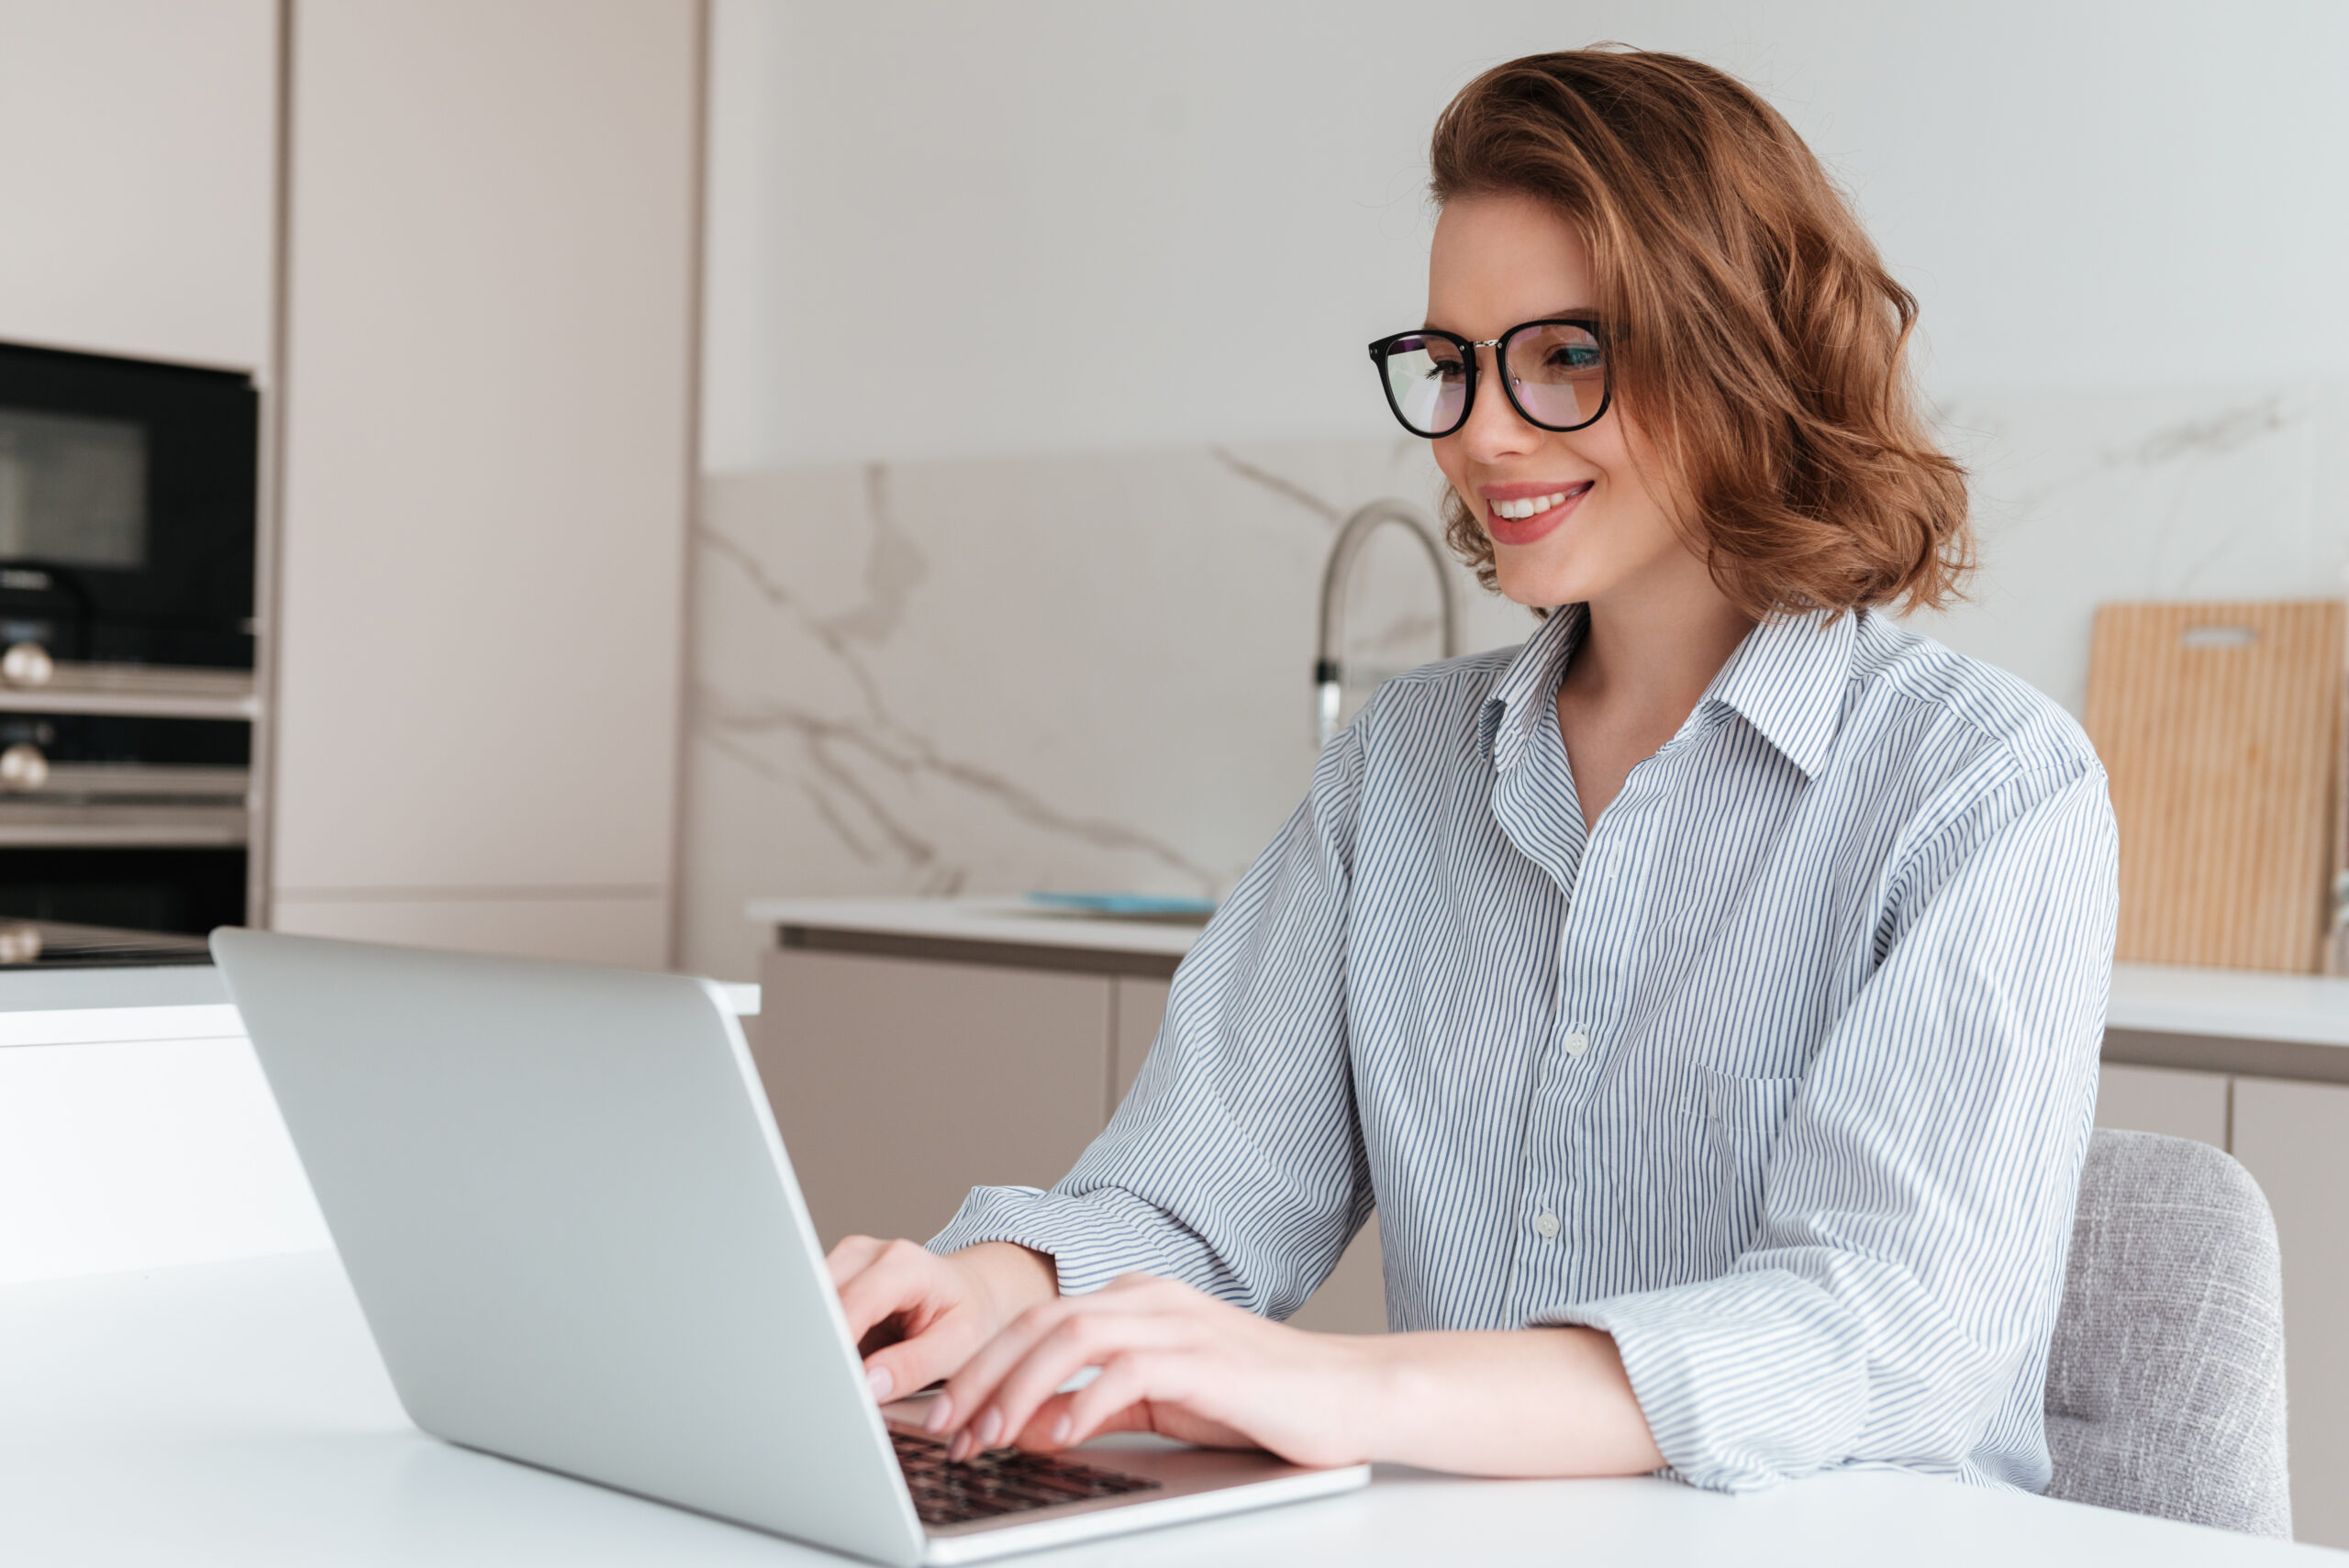 elegant-smiling-woman-glasses-striped-shirt-using-laptop-computer-while-siting-table-kitchen-scaled